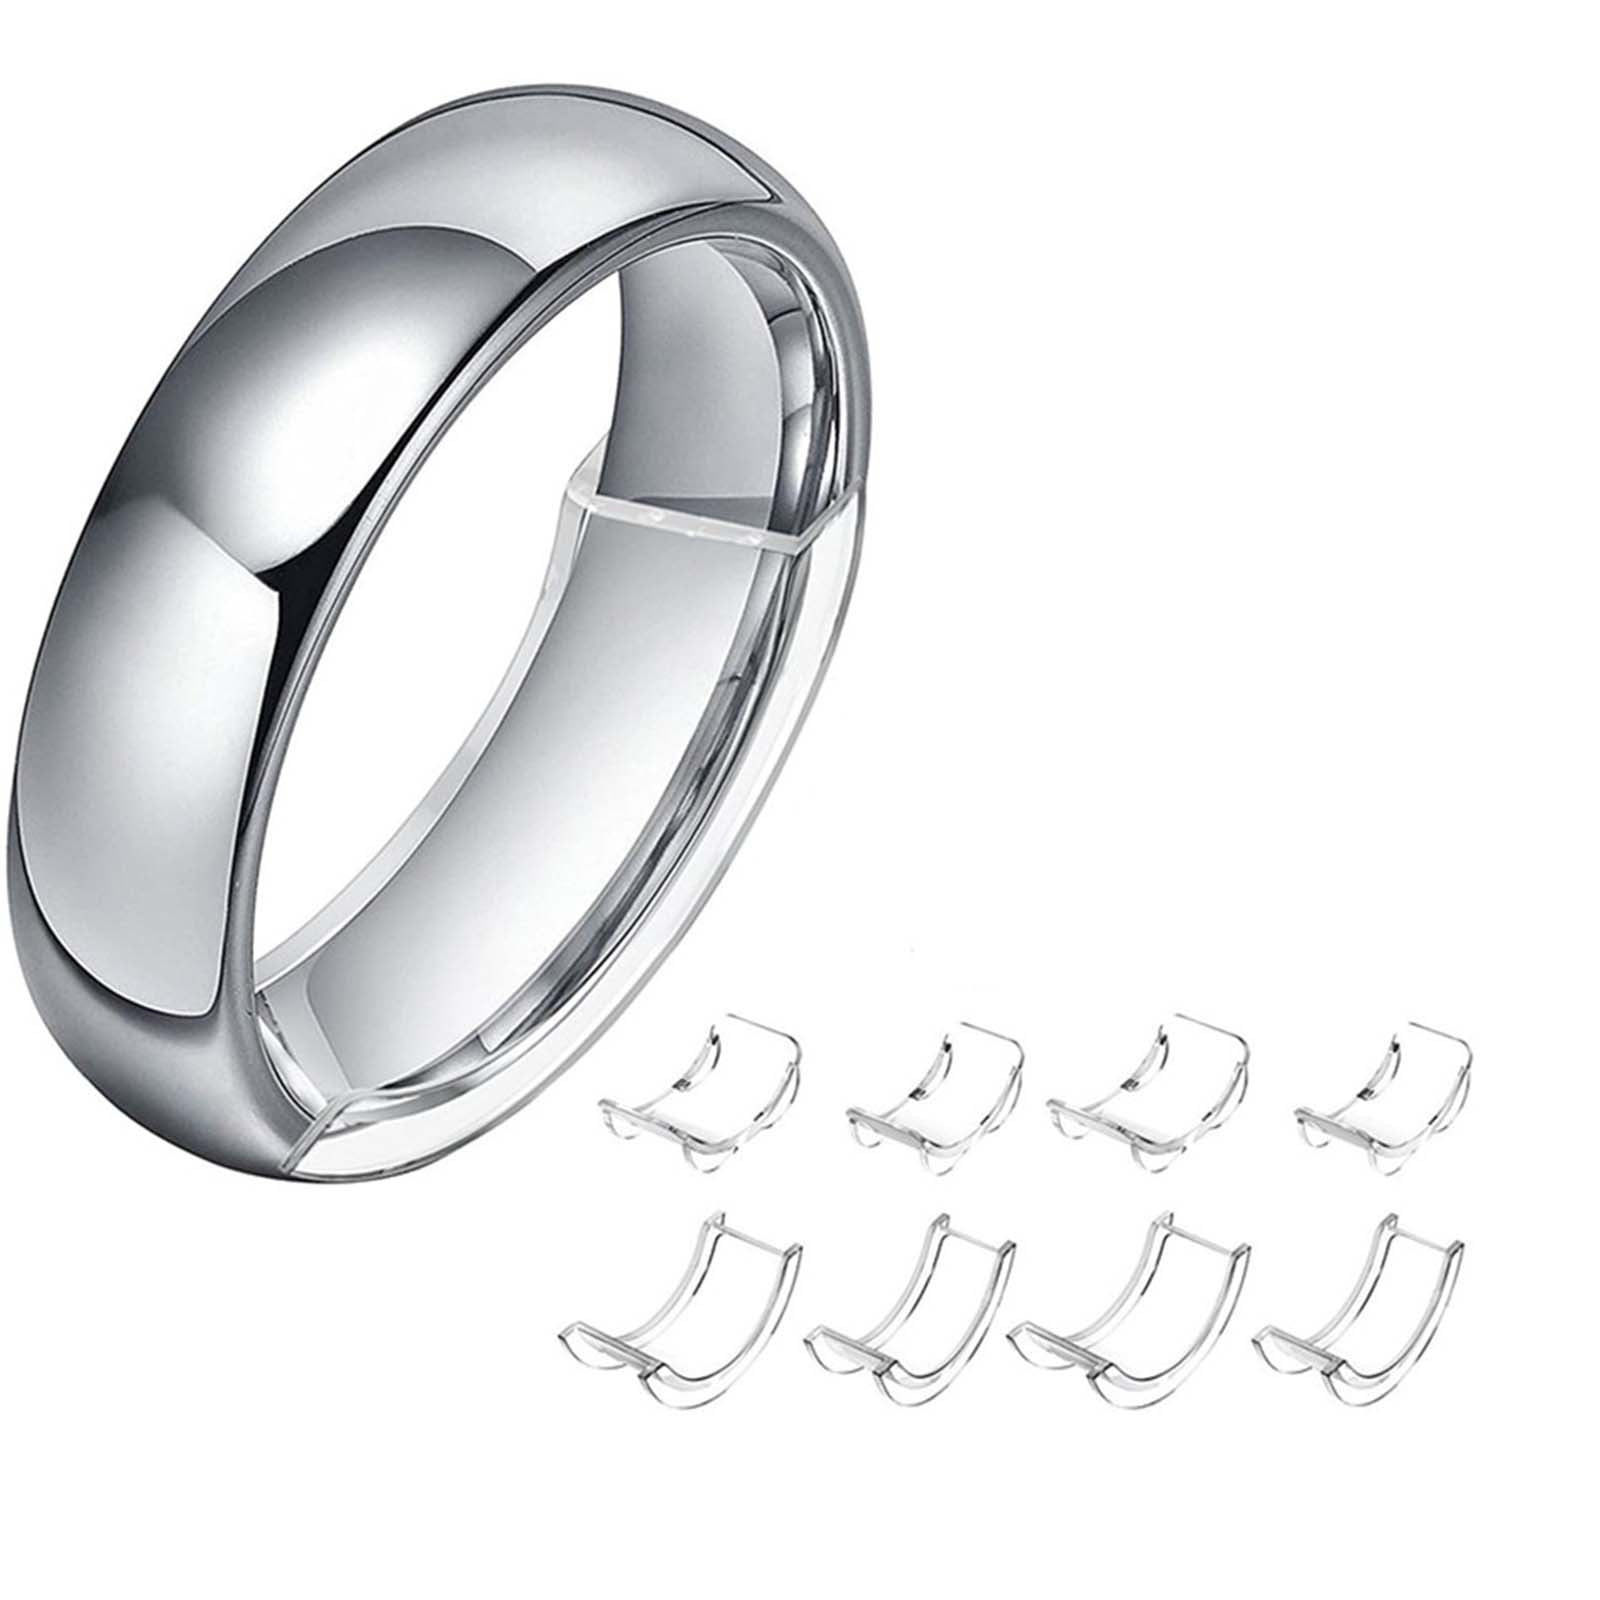 tababy Invisible Ring Size Adjuster for Loose Rings Fit Any Rings 